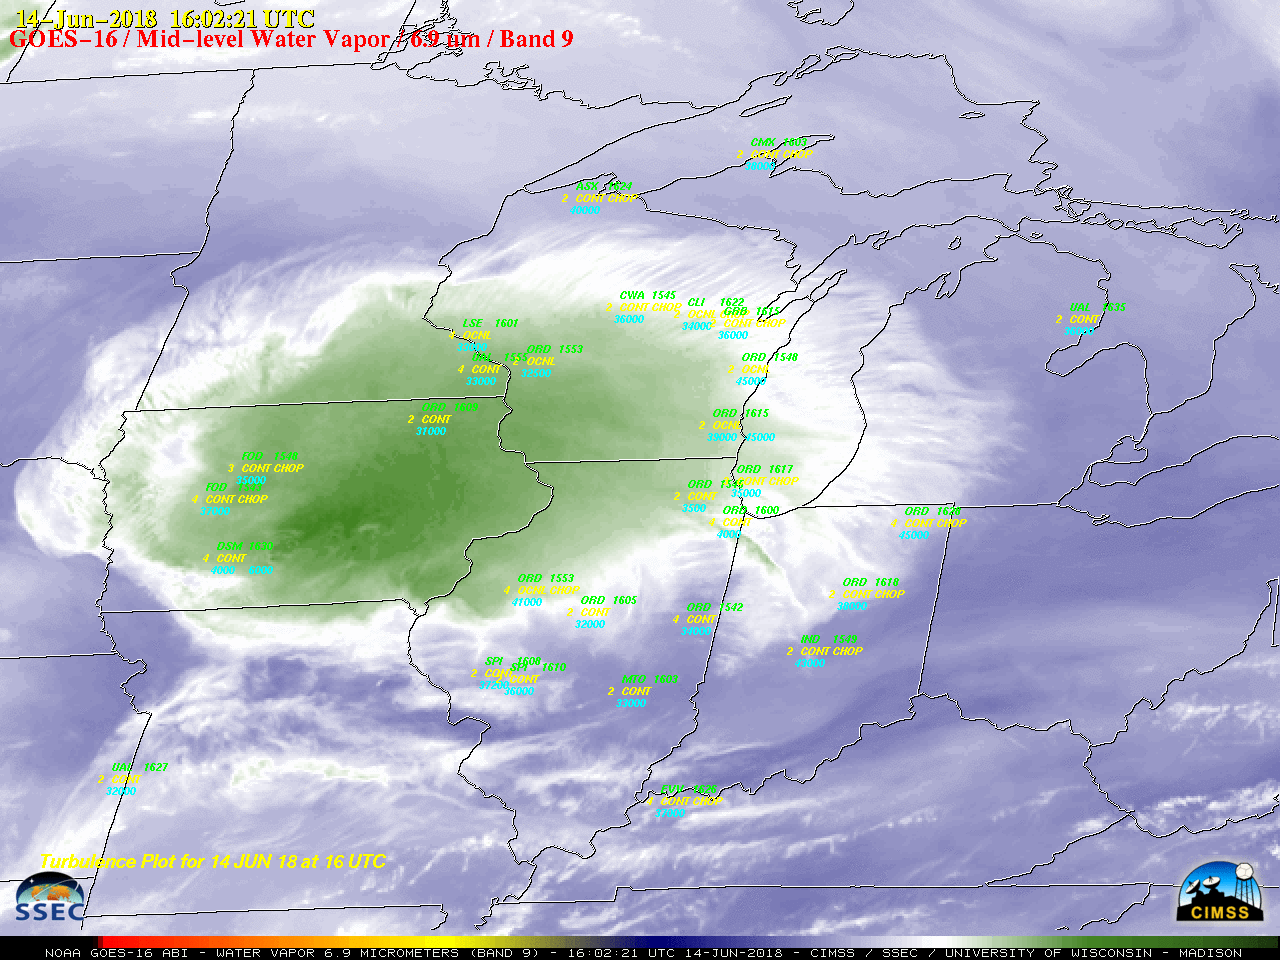 GOES-16 Mid-level Water Vapor (6.9 µm) images, with hourly plots of turbulence [click to play MP4 animation]